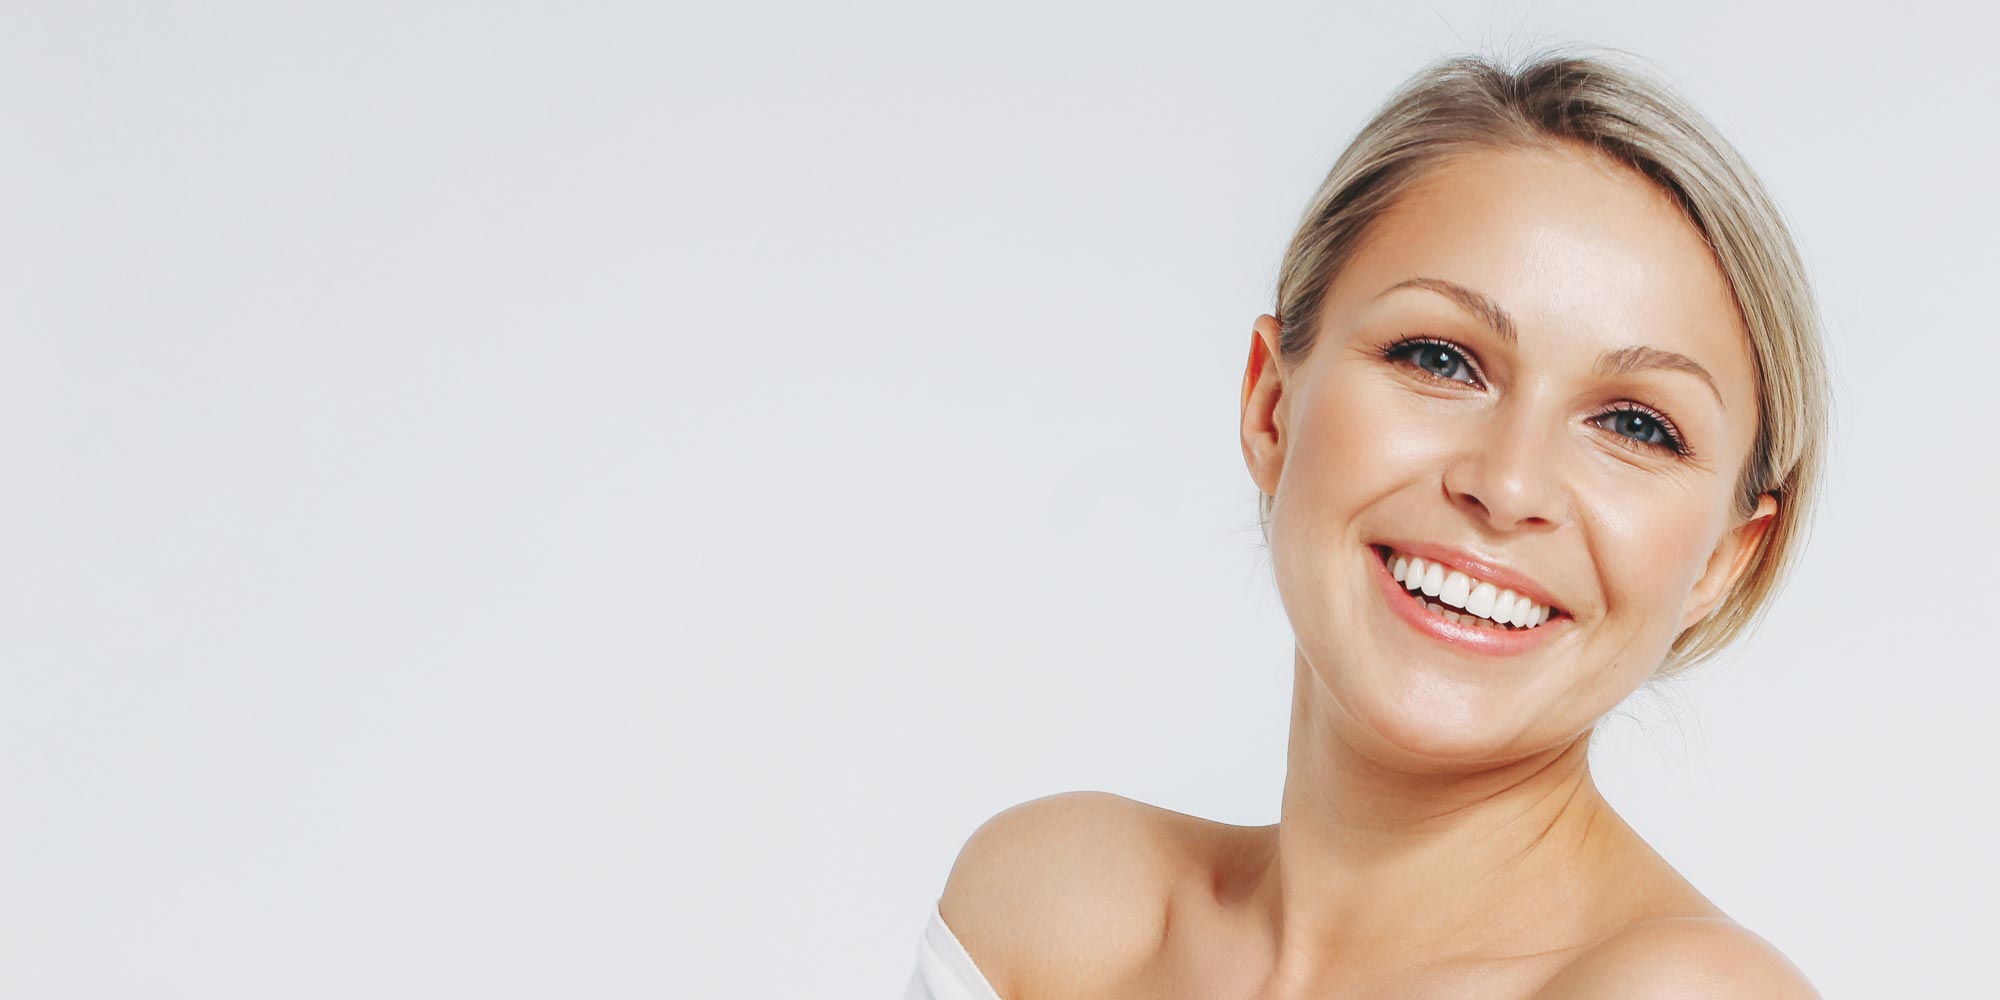 Get To Know The Ins And Outs About Light Therapy Or Led Skin Treatments Cosmetic Injectables